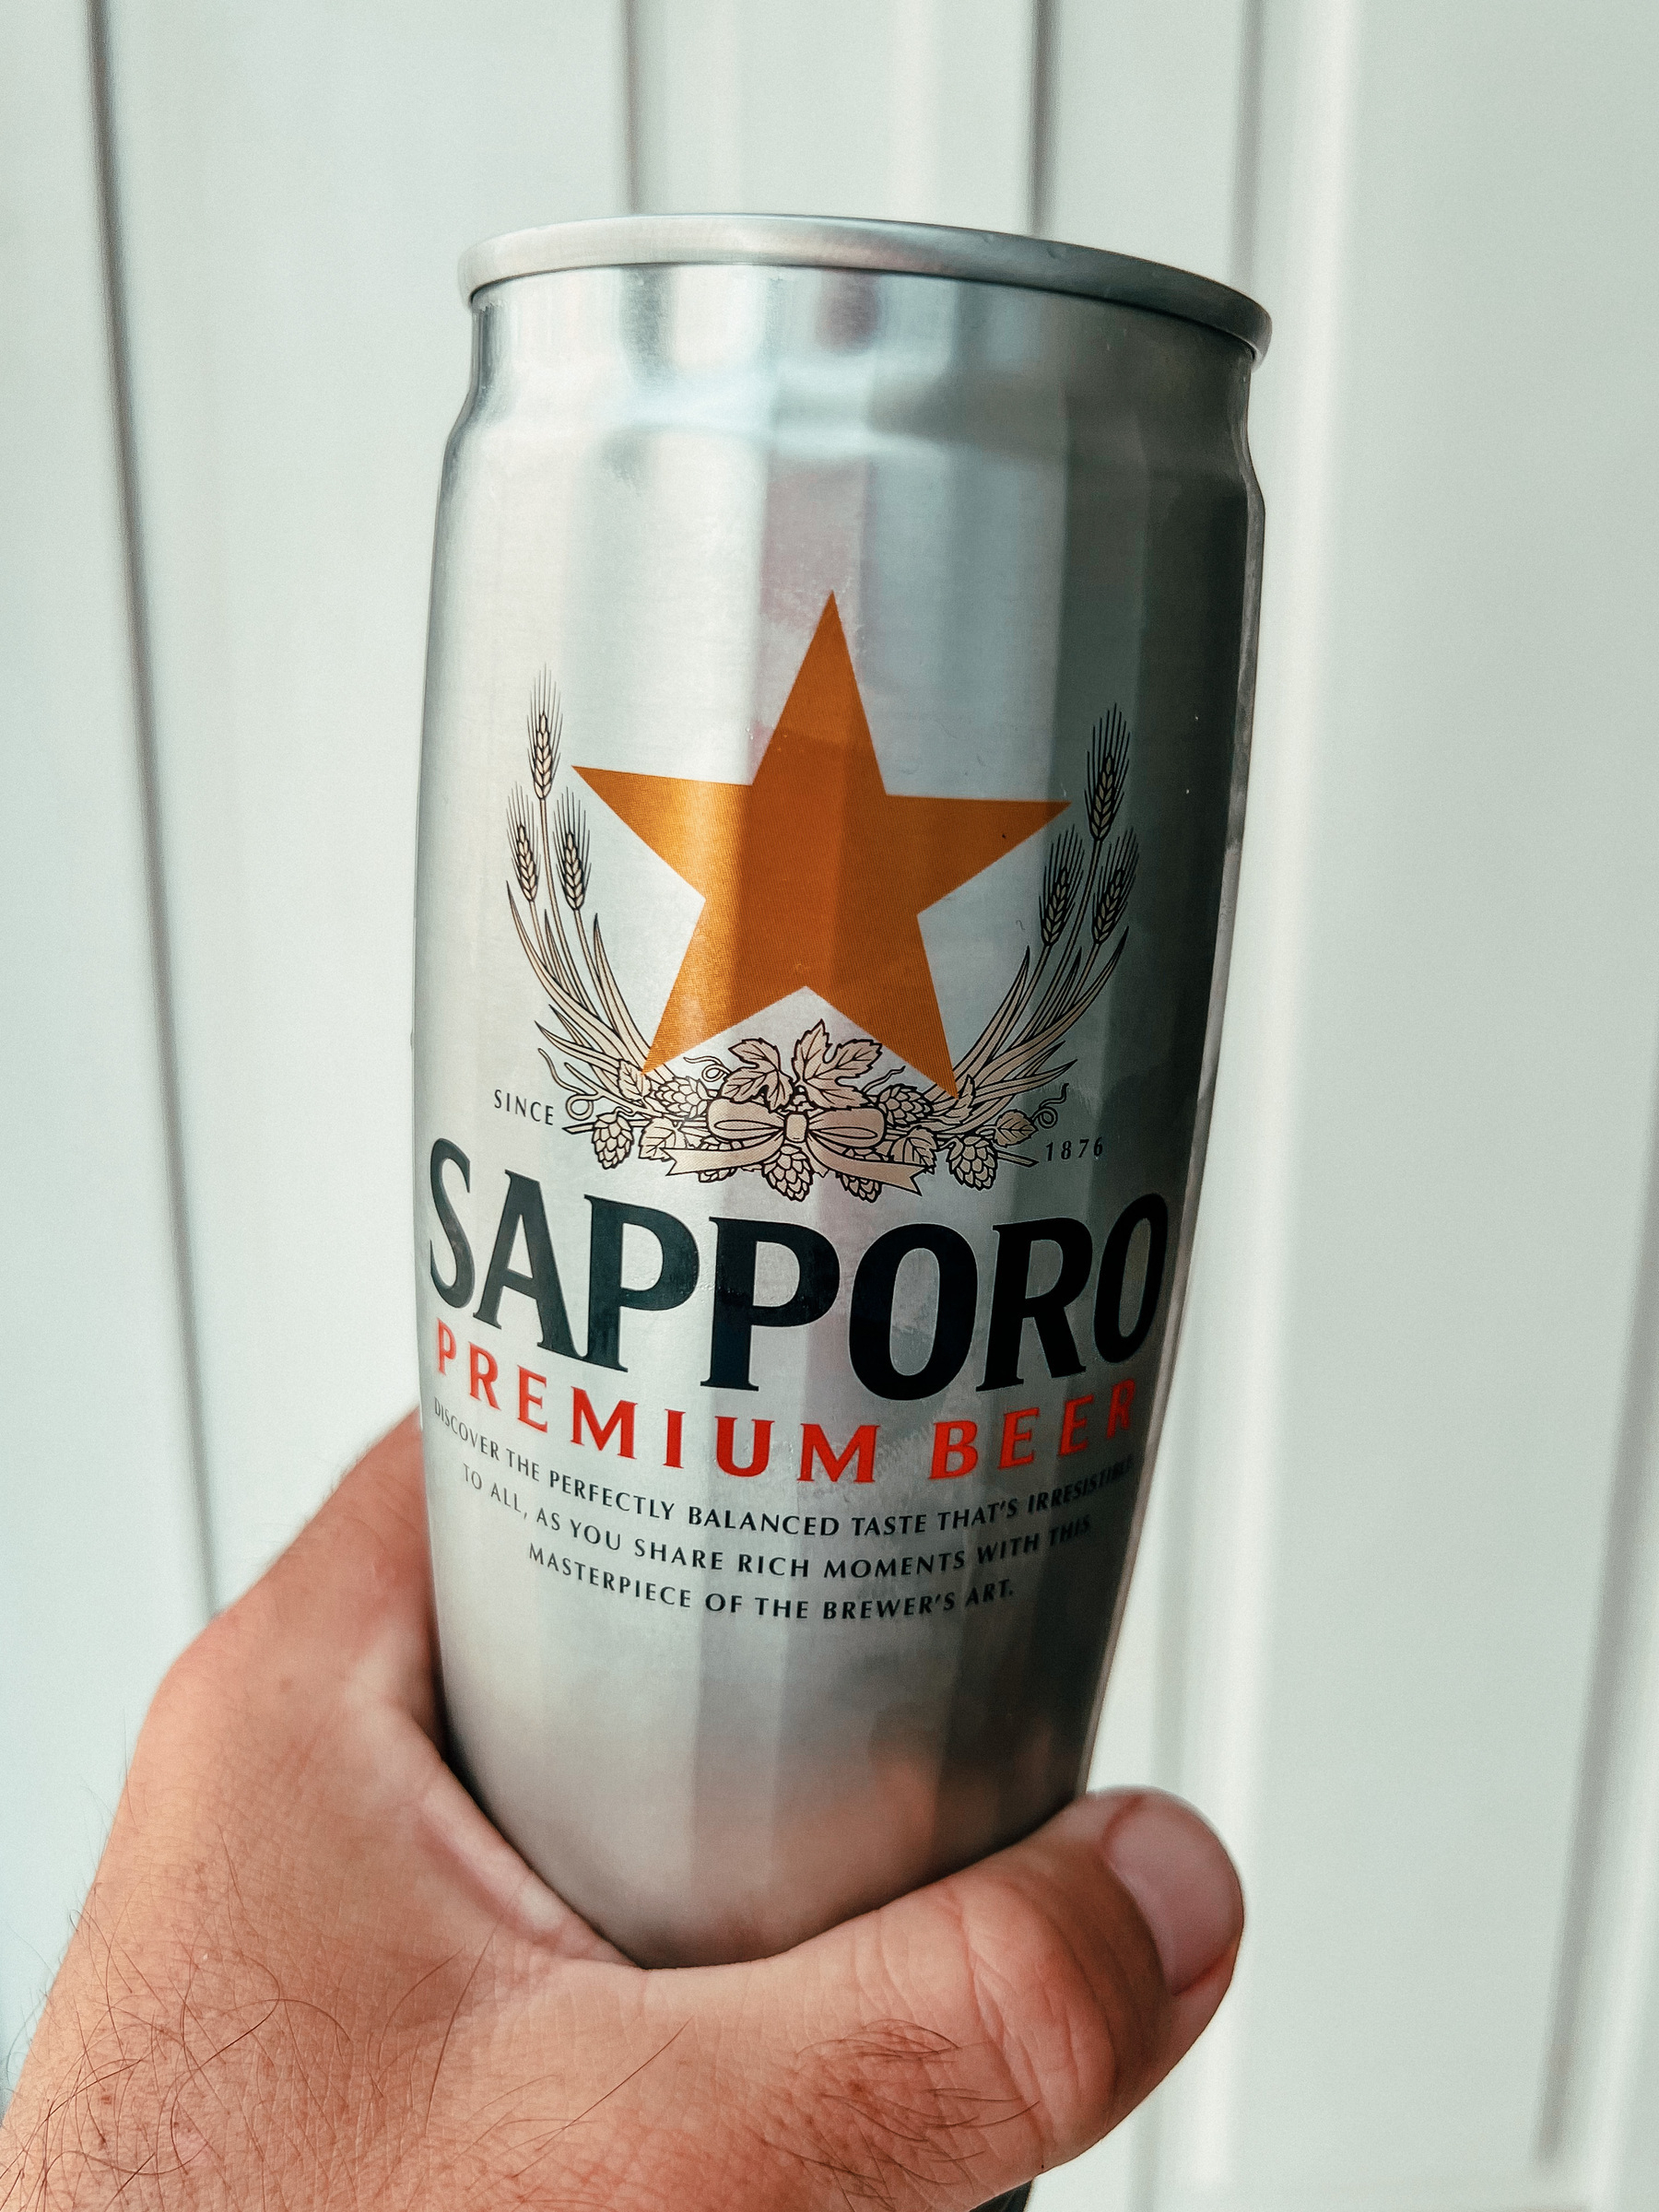 Hand holding a can of Sapporo beer. Yummy.